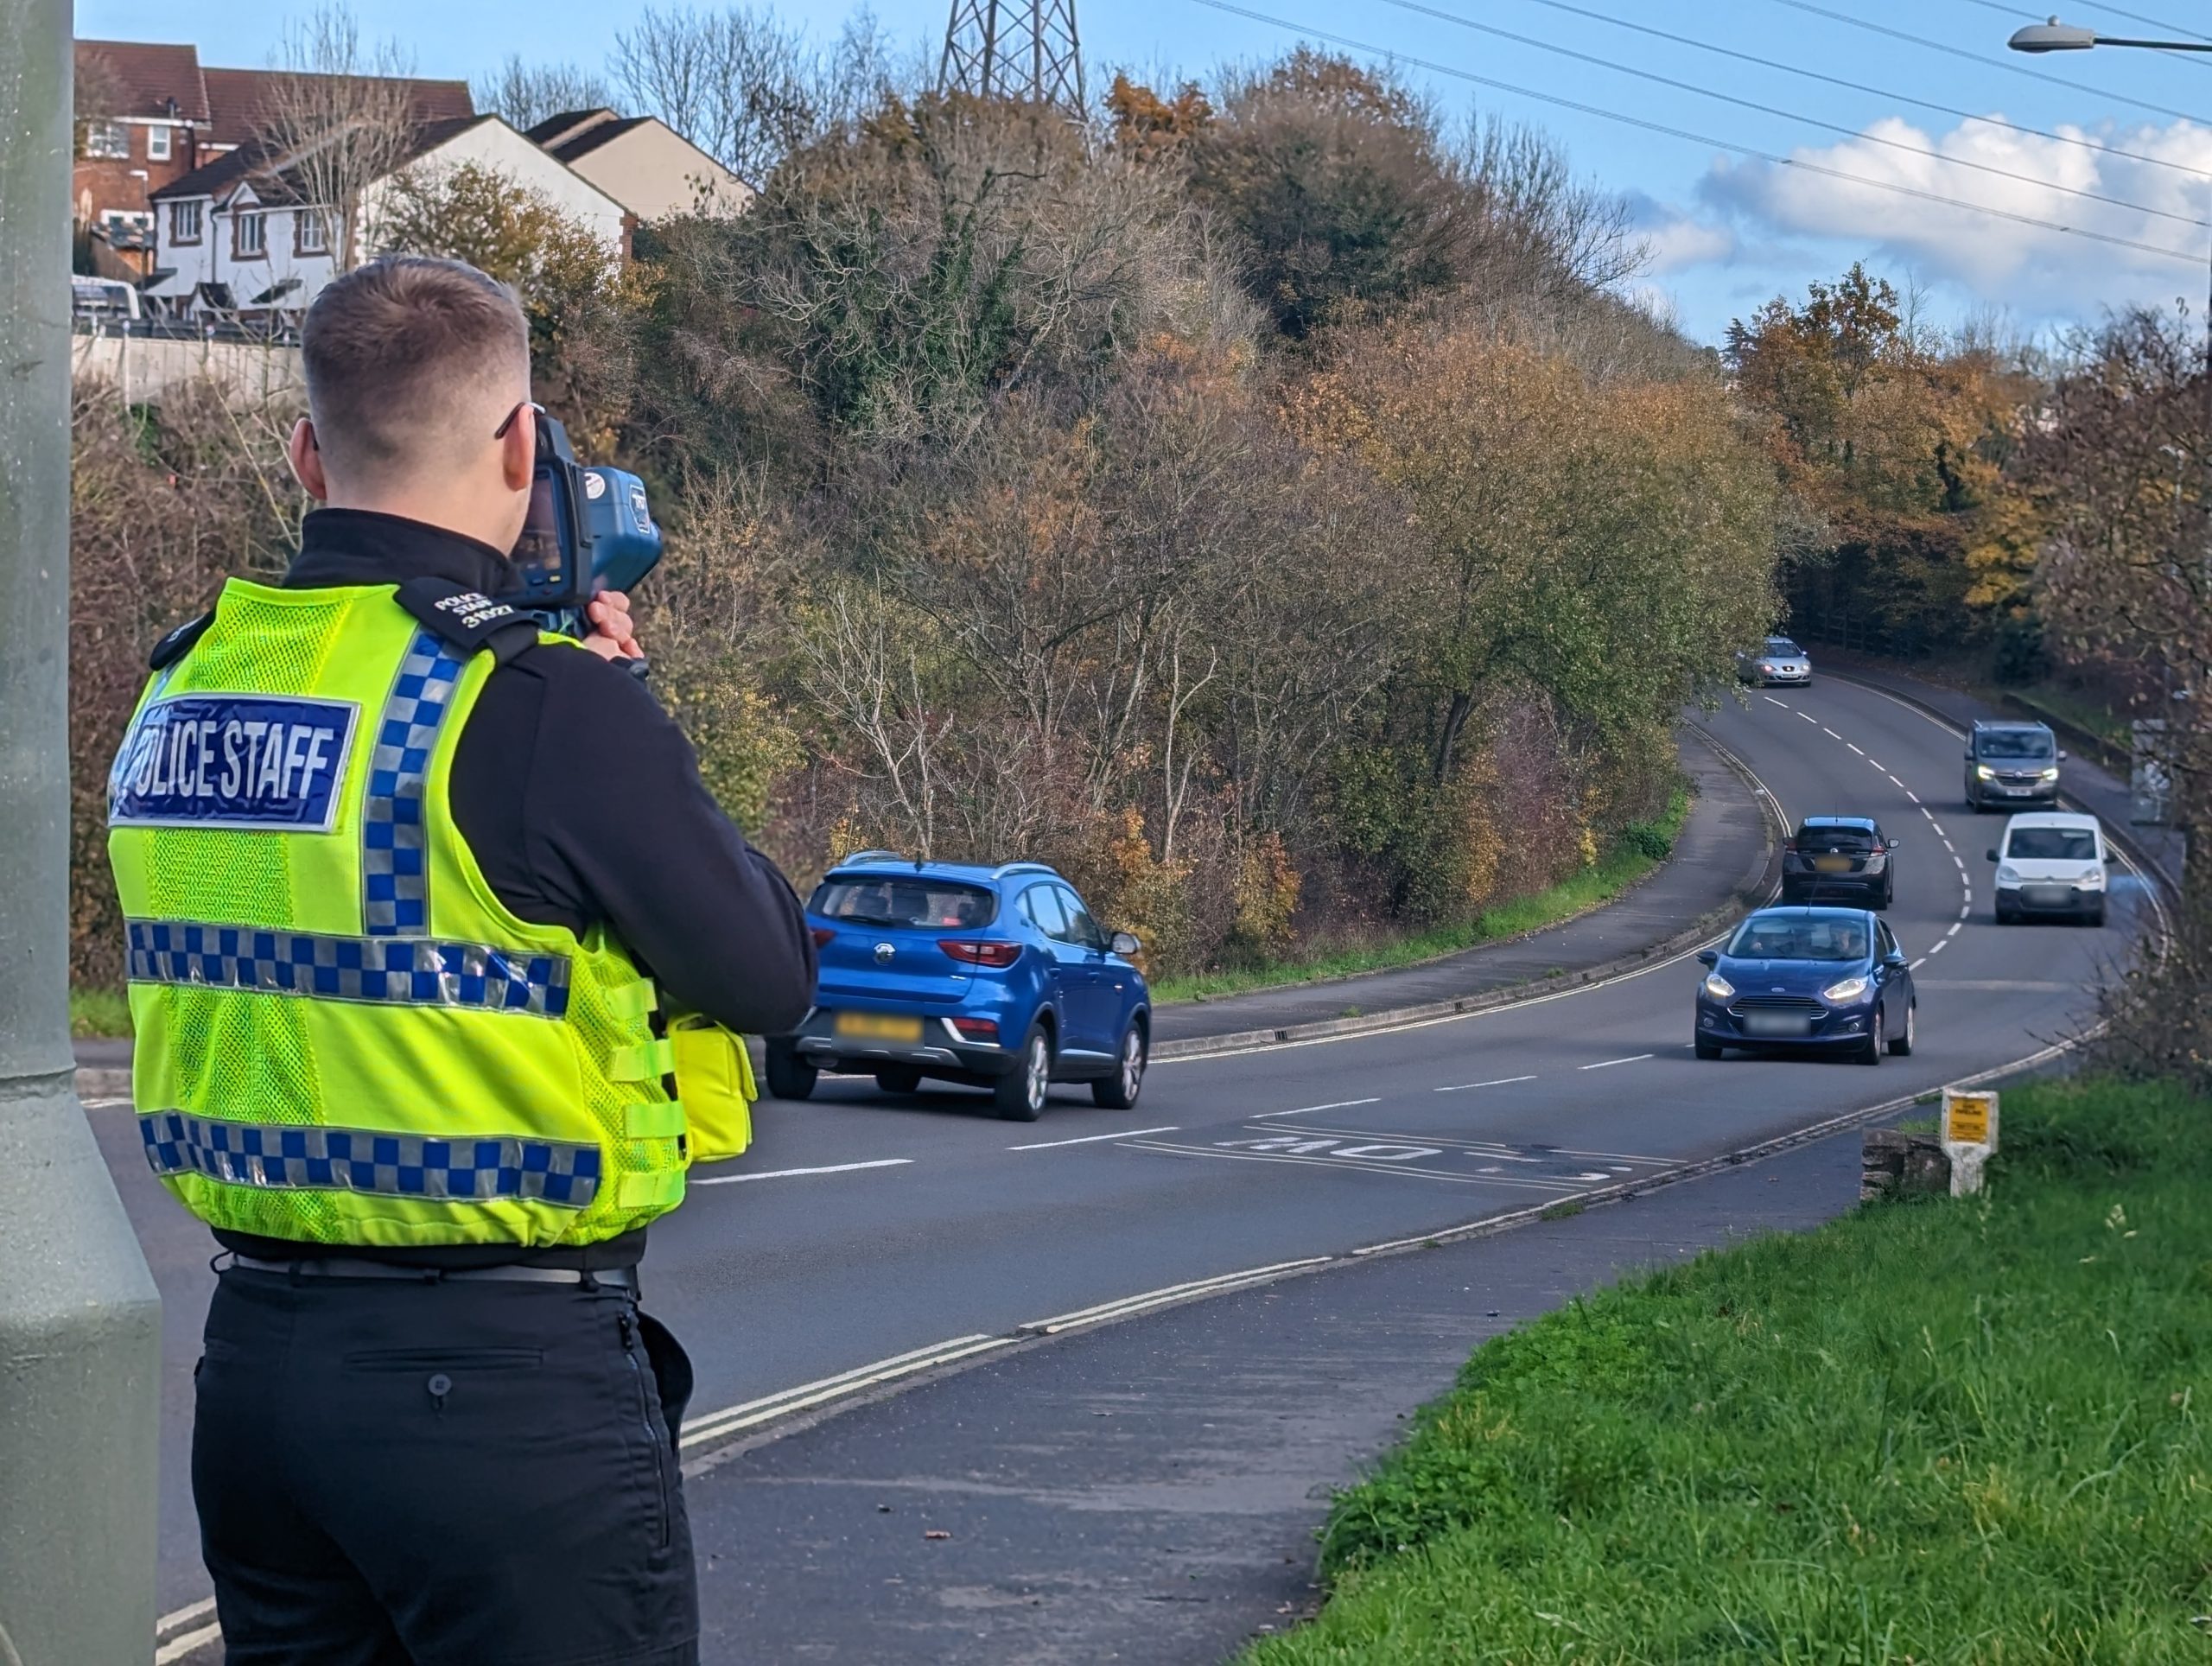 A Devon & Cornwall Police Speed Detection Officer monitoring speed on Browns Bridge Road in Torquay